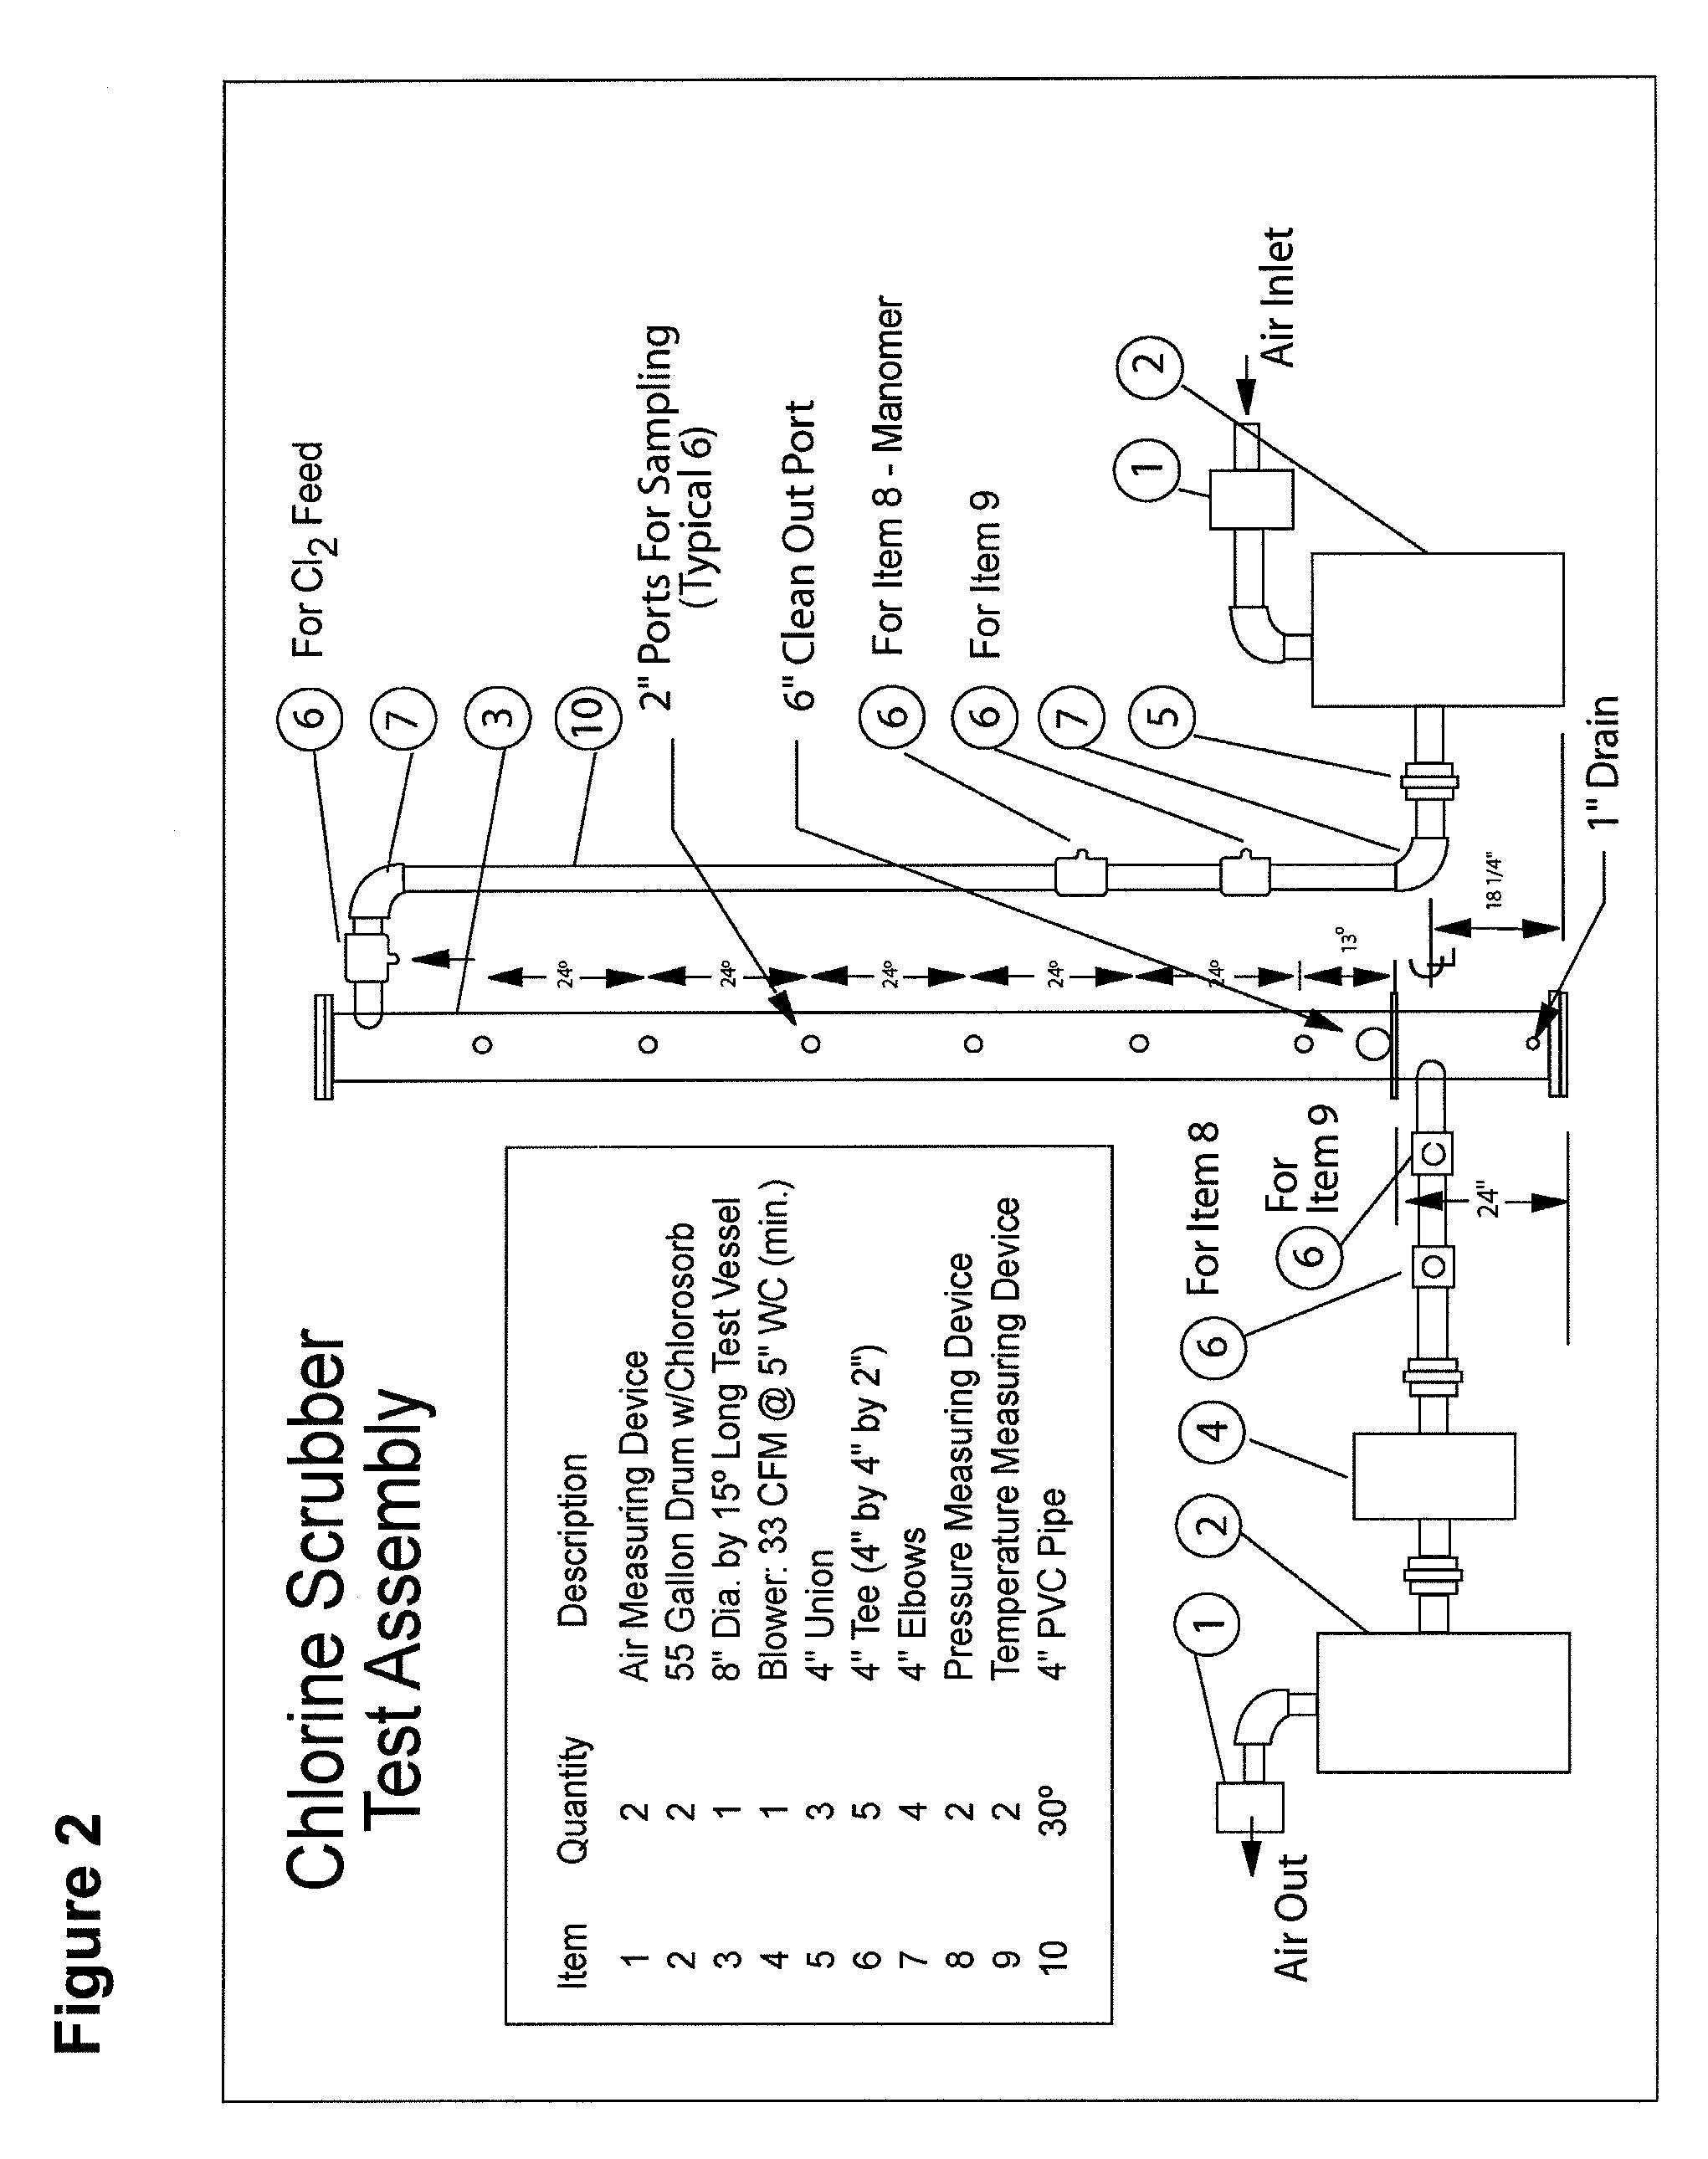 Dry-Scrubbing Media Compositions and Methods of Production and Use